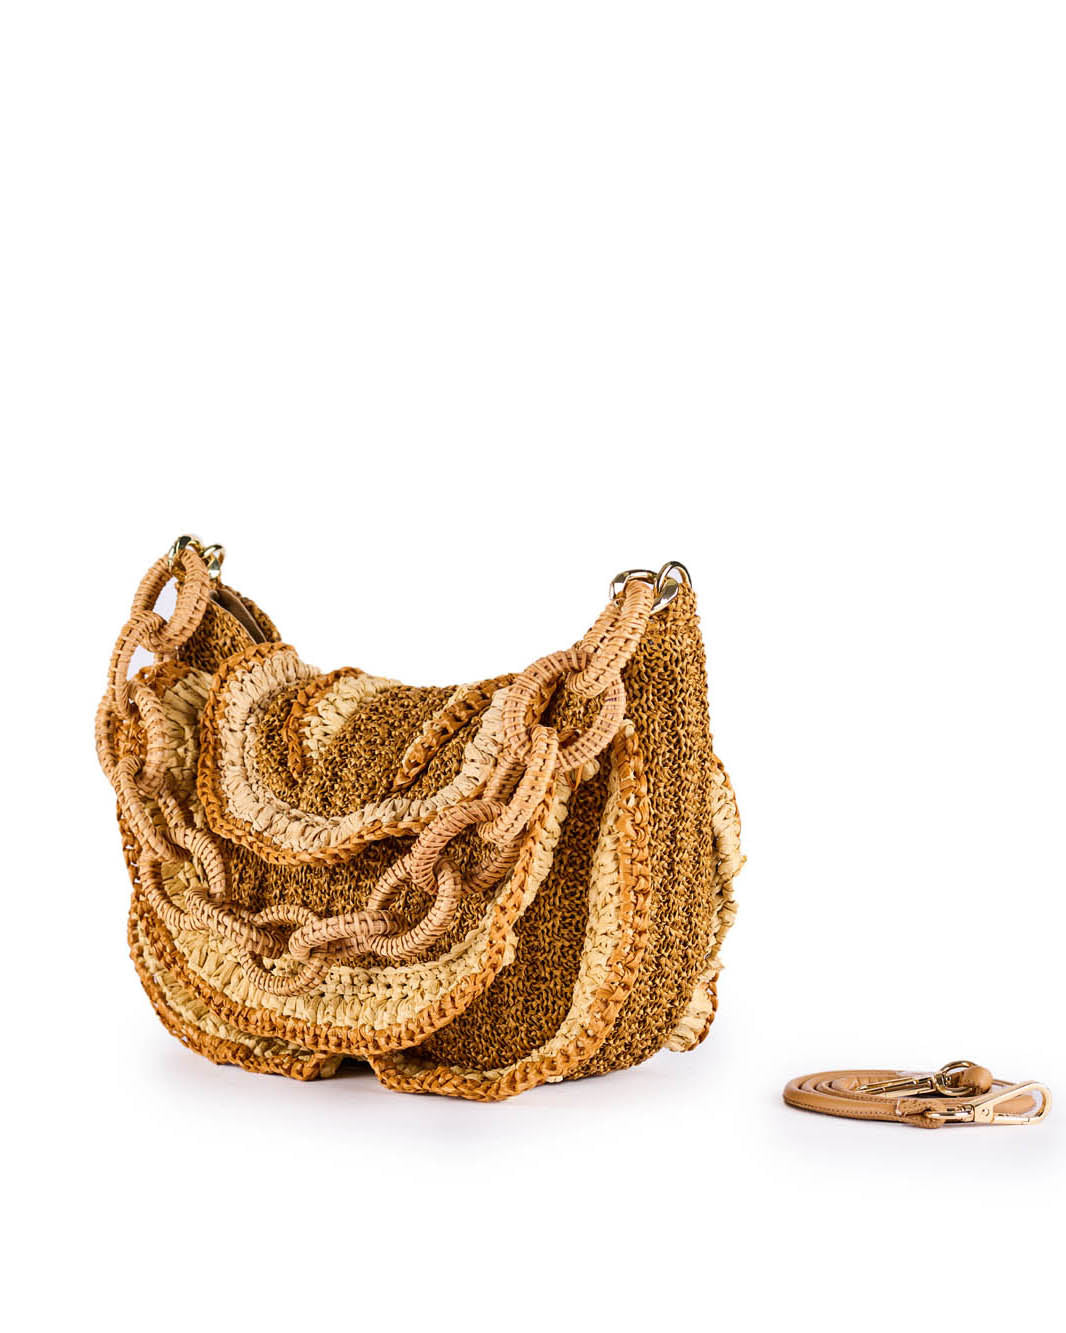 Woven straw bag with chain detailing and attached keychain